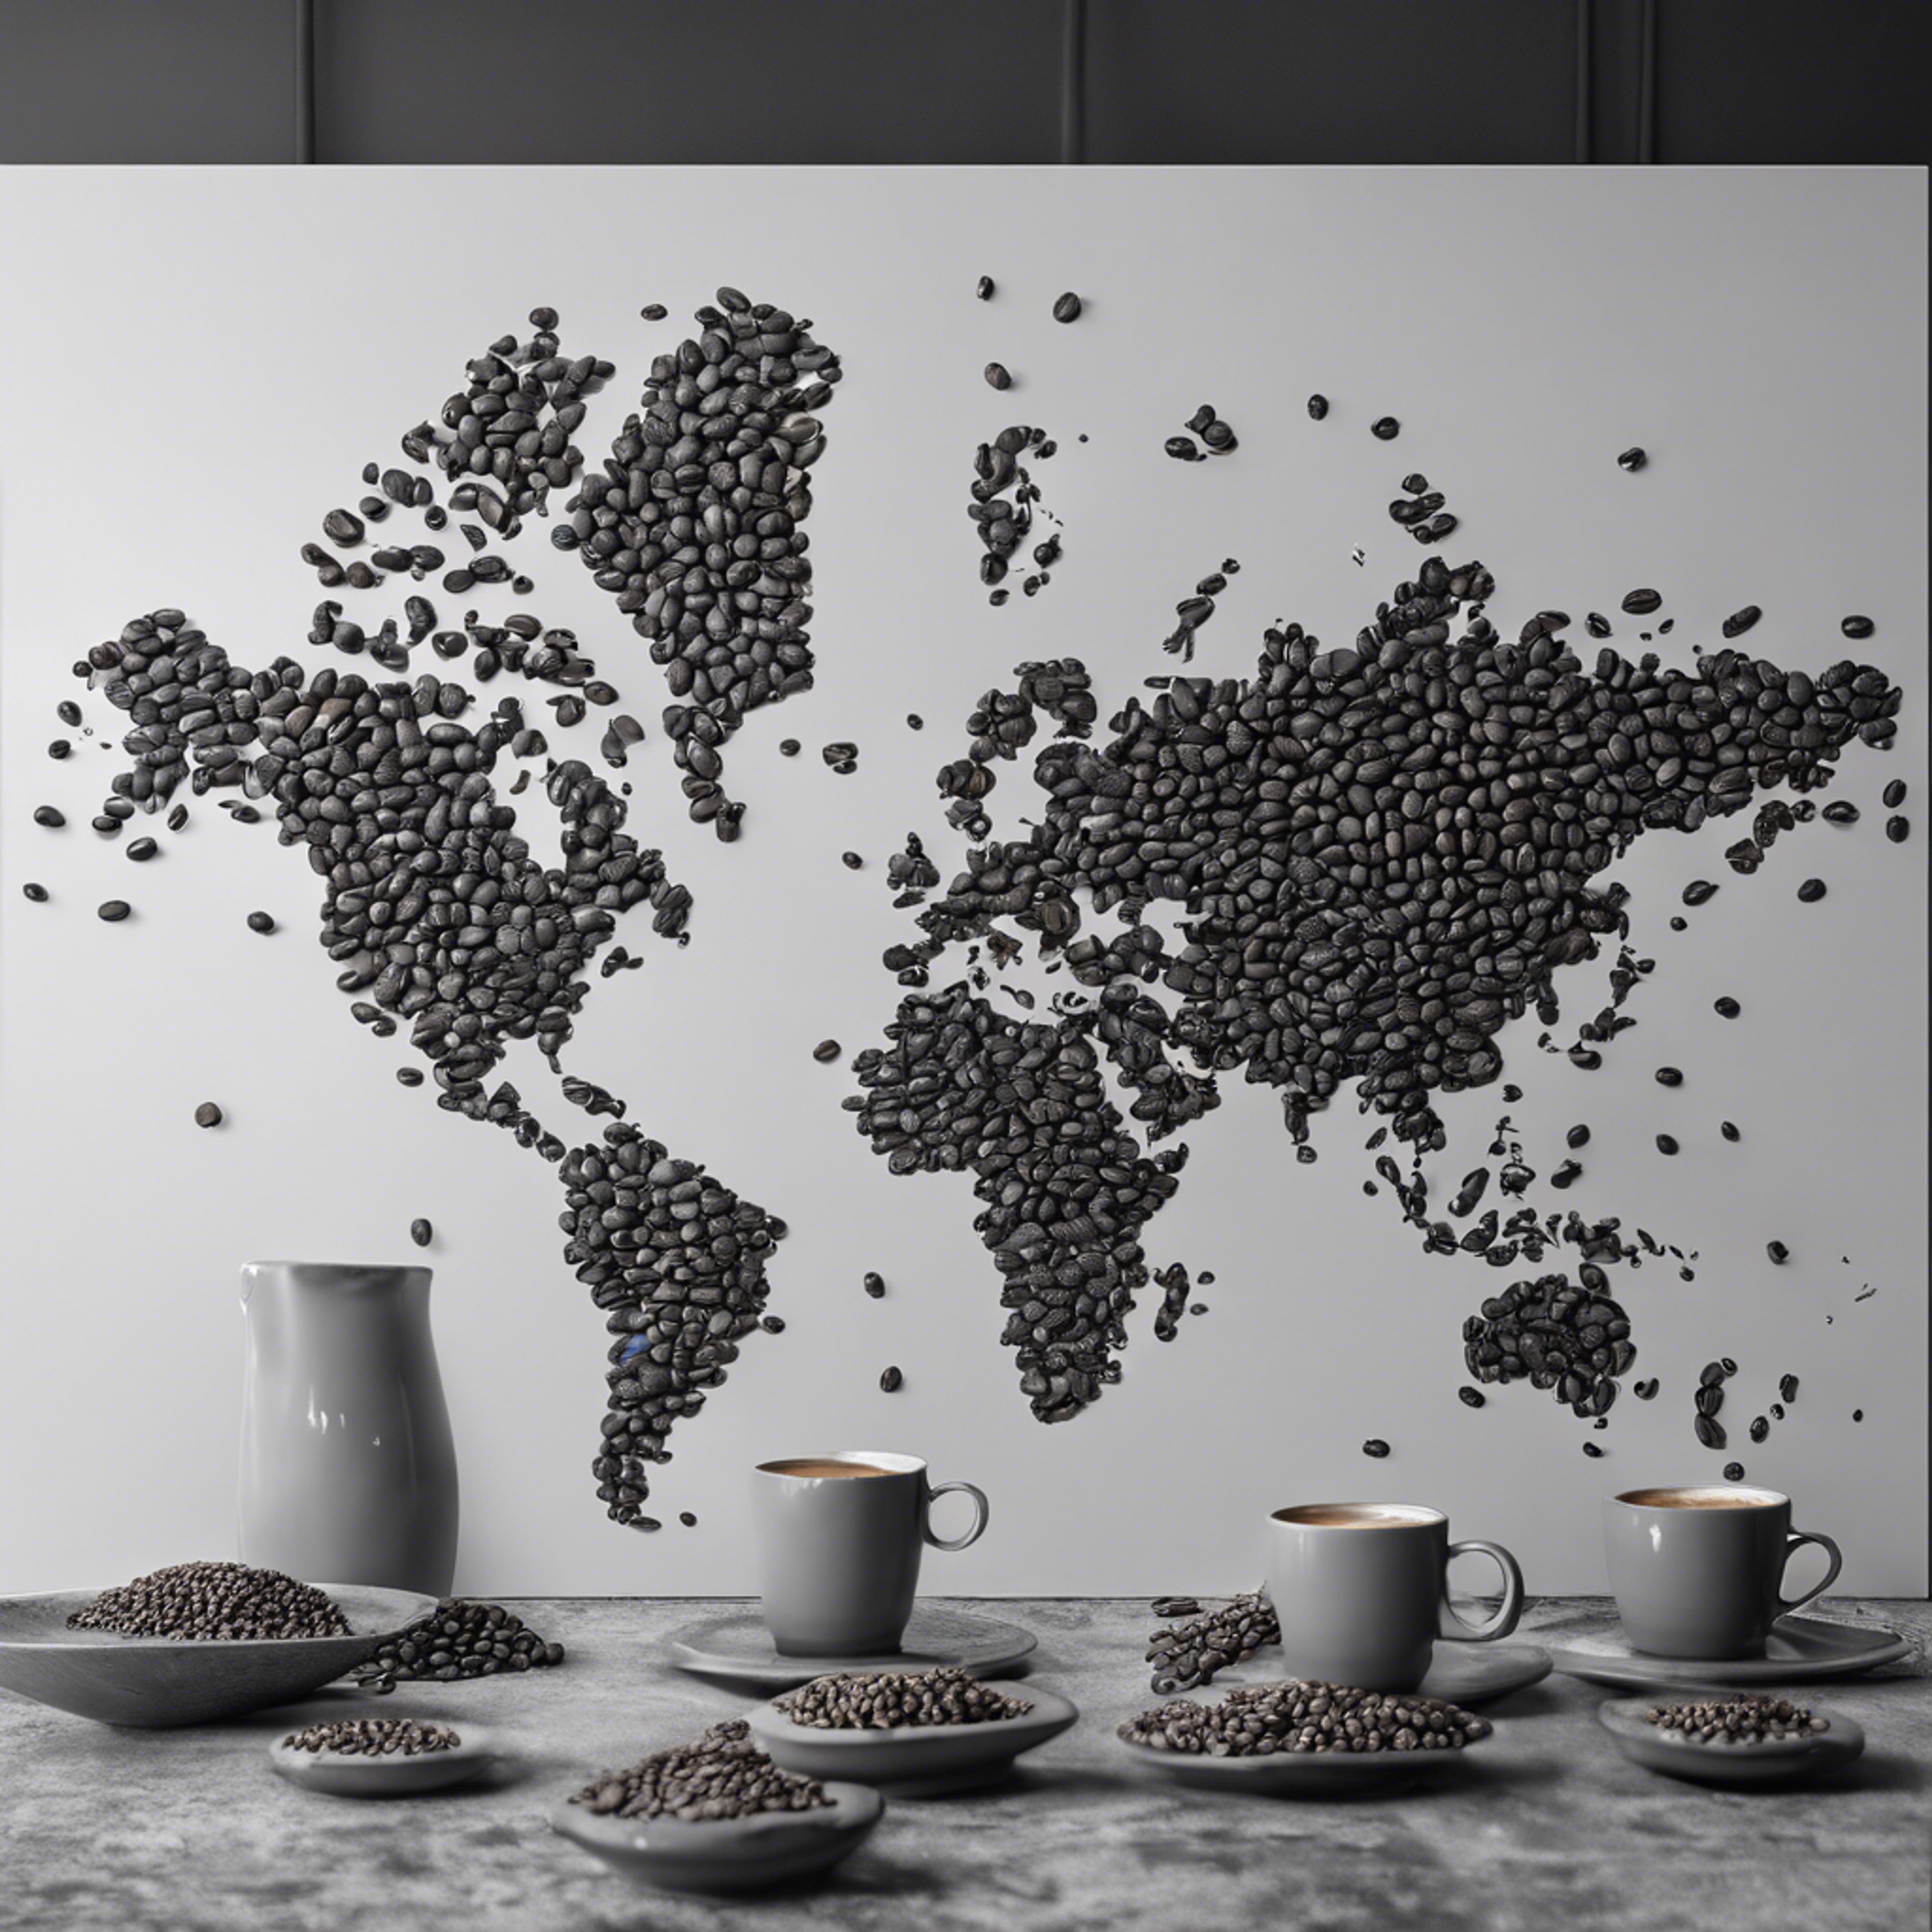 A grayscale world map laid out with coffee beans on a cafe table. Валлпапер[a42175c9d73a43528667]